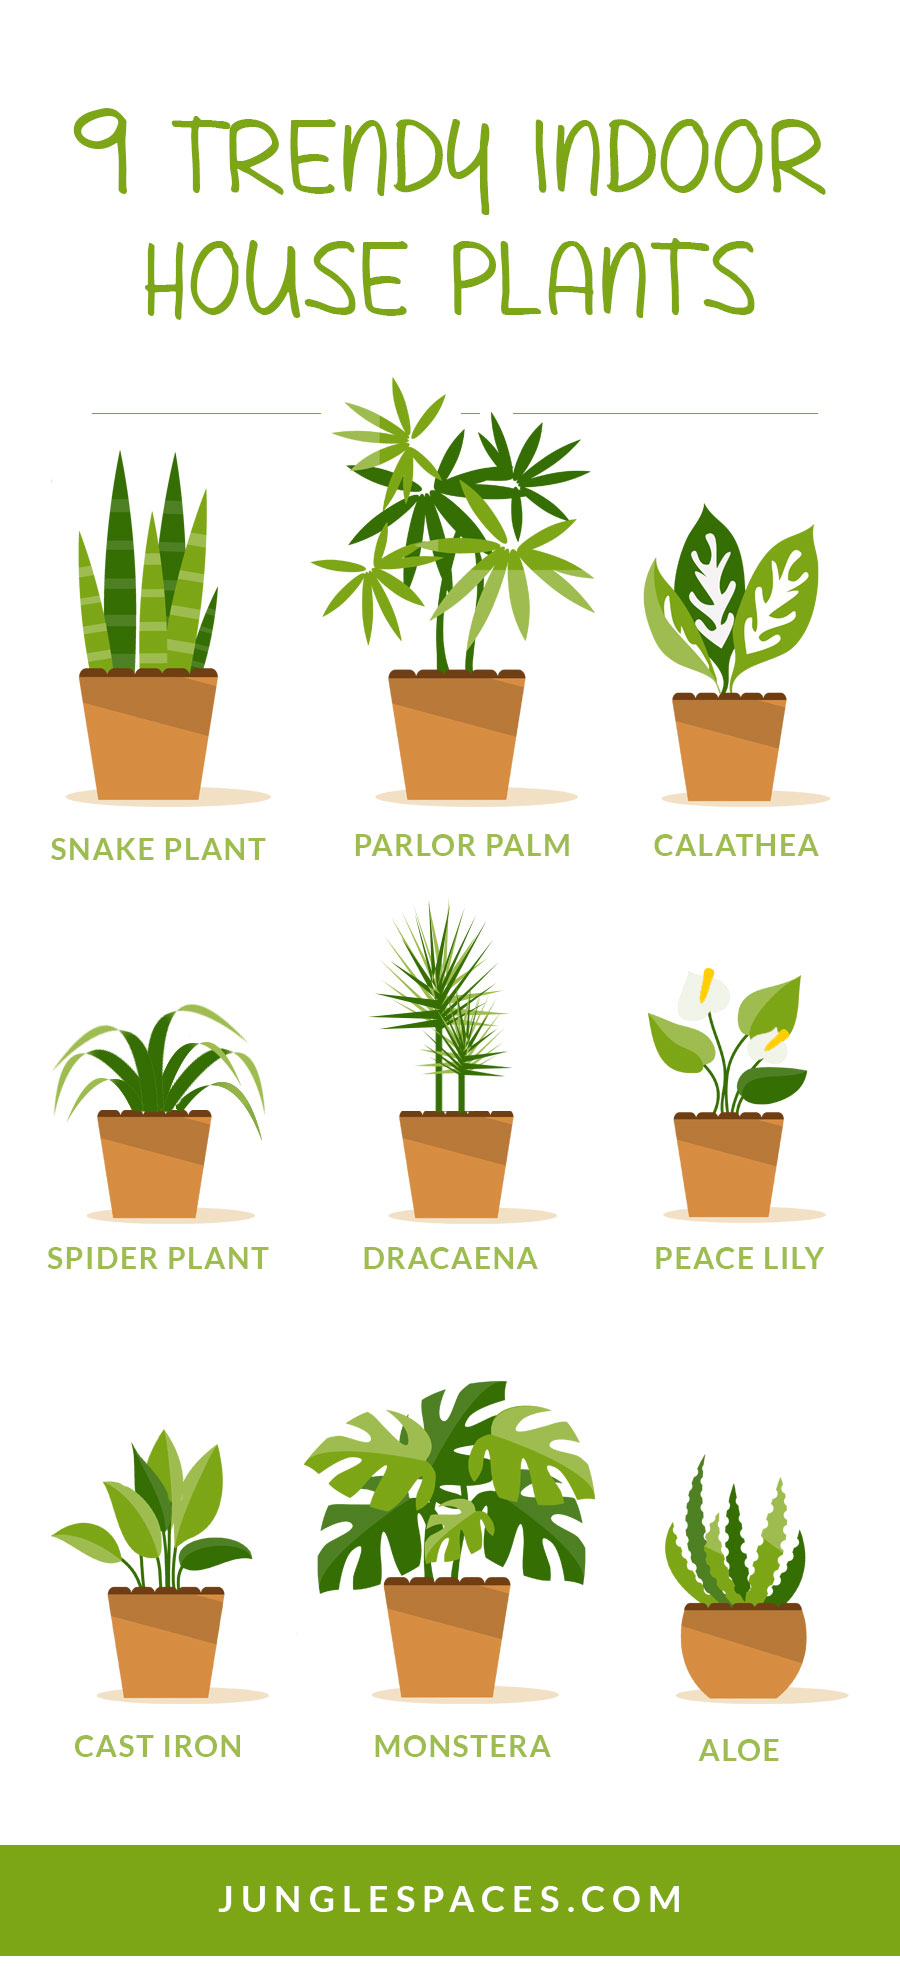 9 Trendy Houseplants That Don't Need Direct Sunlight ...